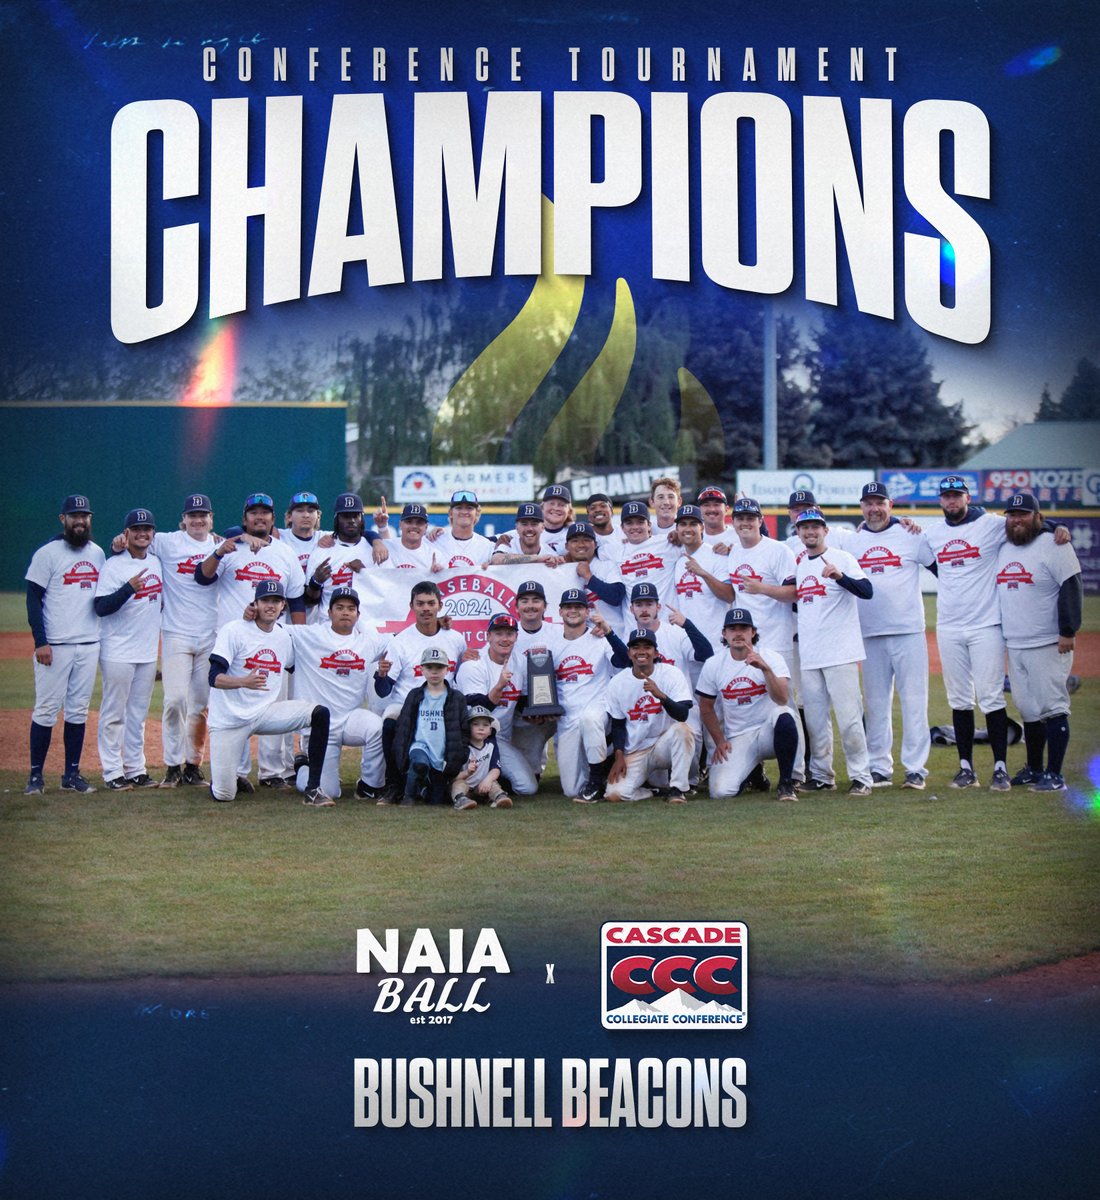 🚨 Congratulations to Bushnell (OR) (29-24) on winning the 2024 Cascade Collegiate Conference Tournament Championship! The Beacons swept their way through the tournament going 3-0 and defeating #6 LC State twice and RV British Columbia to claim their first tournament title in the